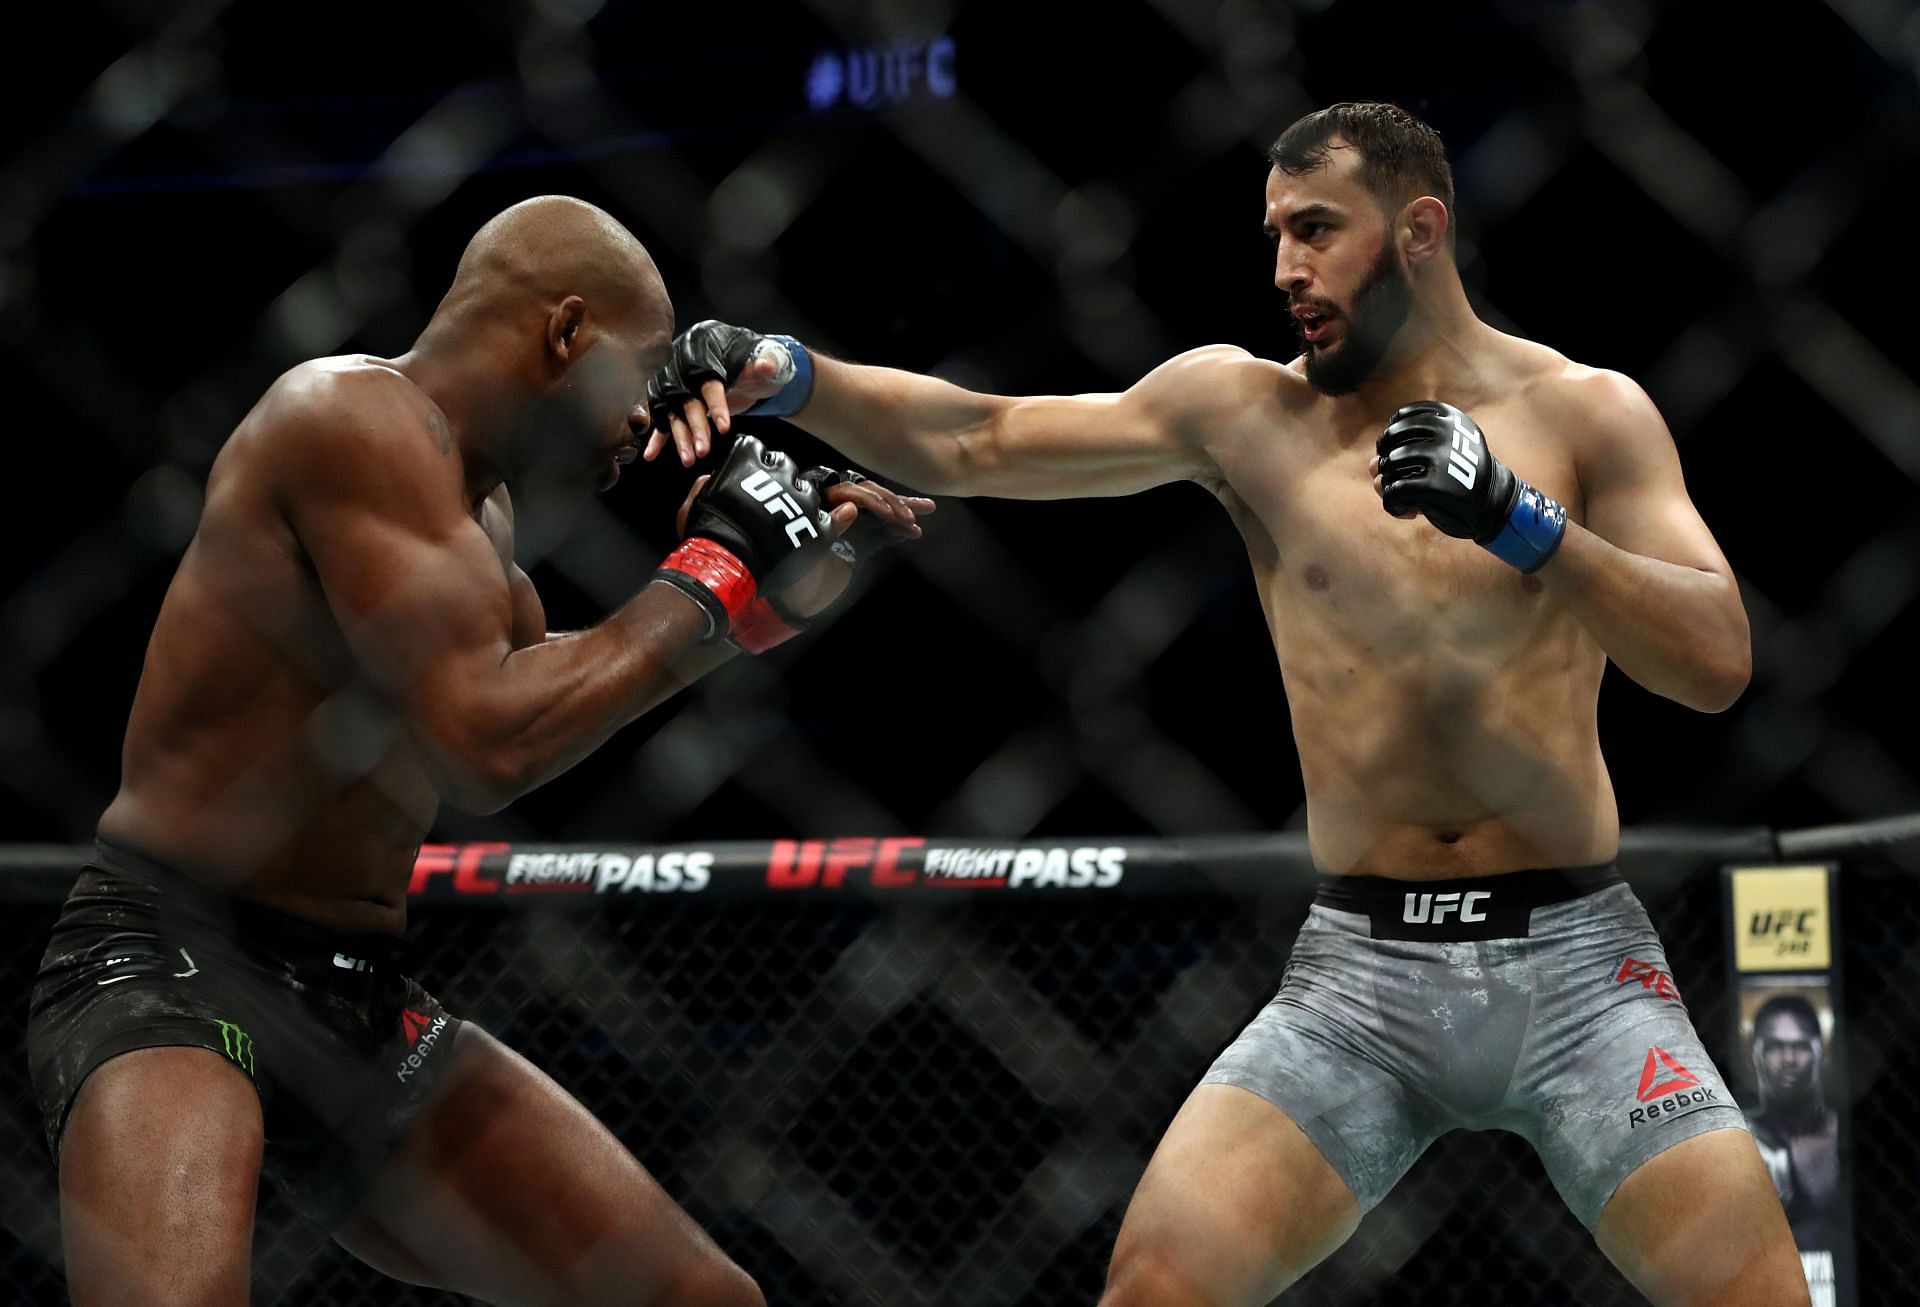 After a close bout with Jon Jones, Dominick Reyes has fallen off a cliff